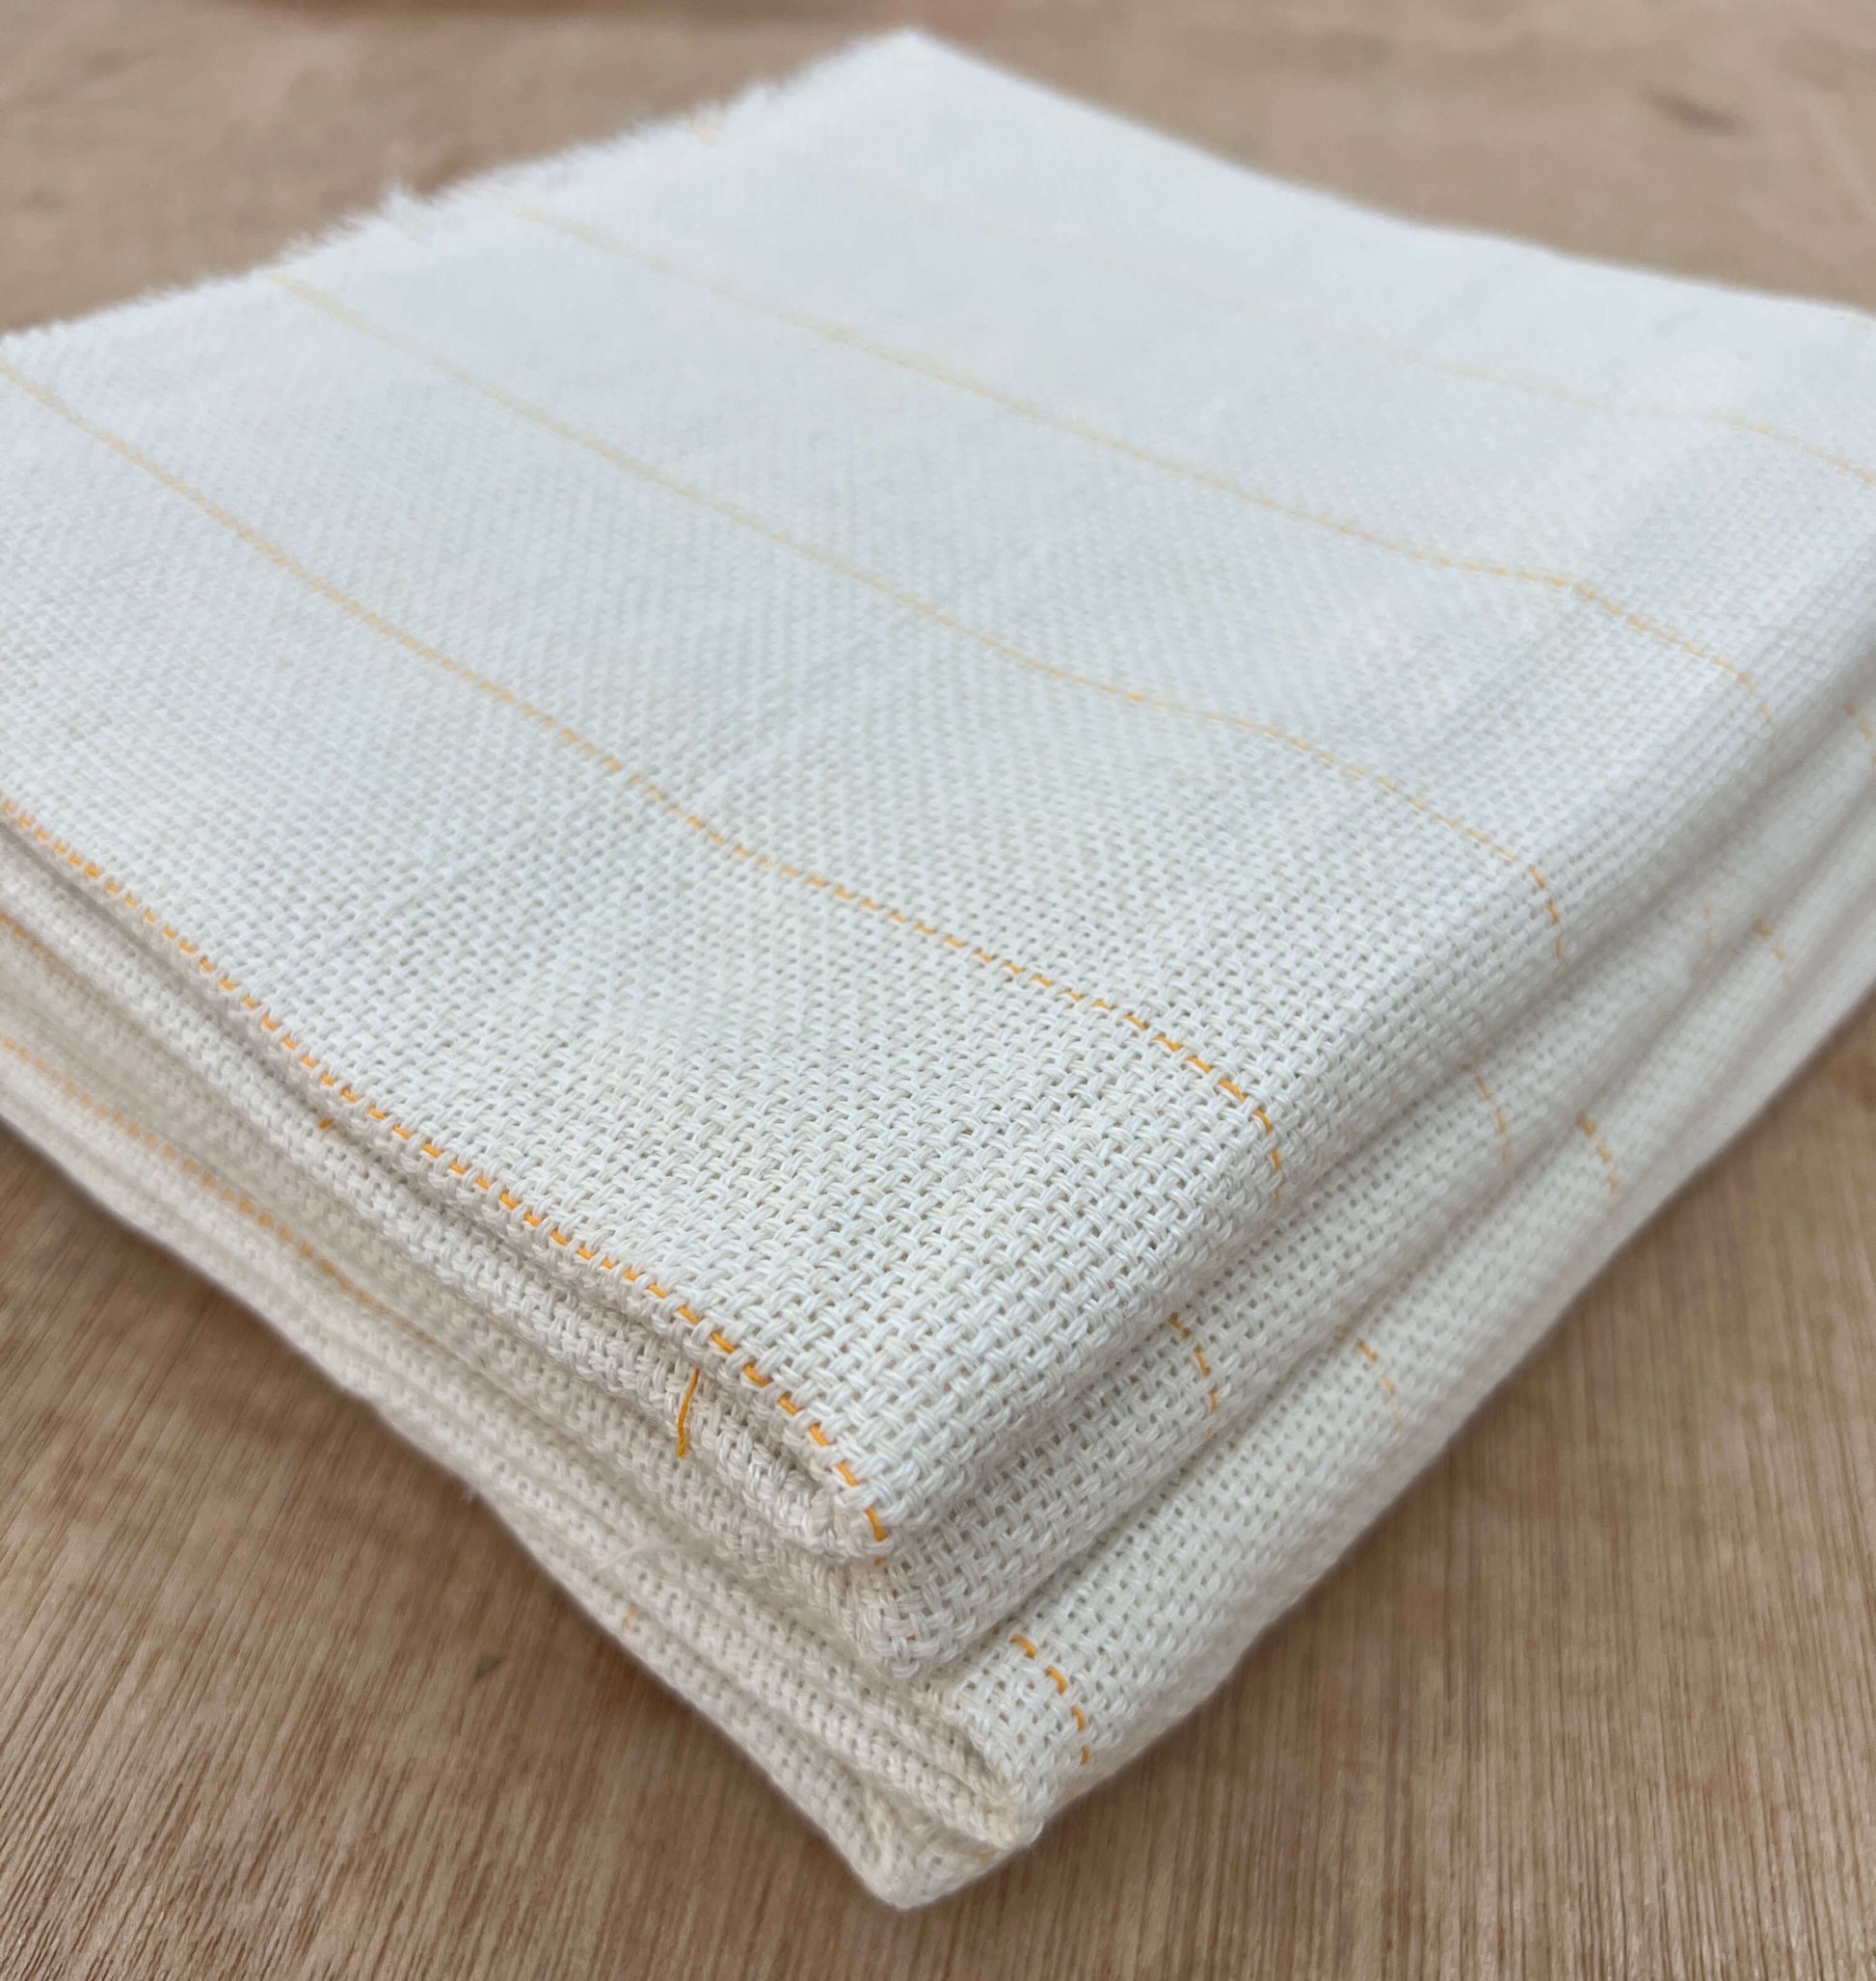 Primary Tufting Cloth 2.1x4 meters